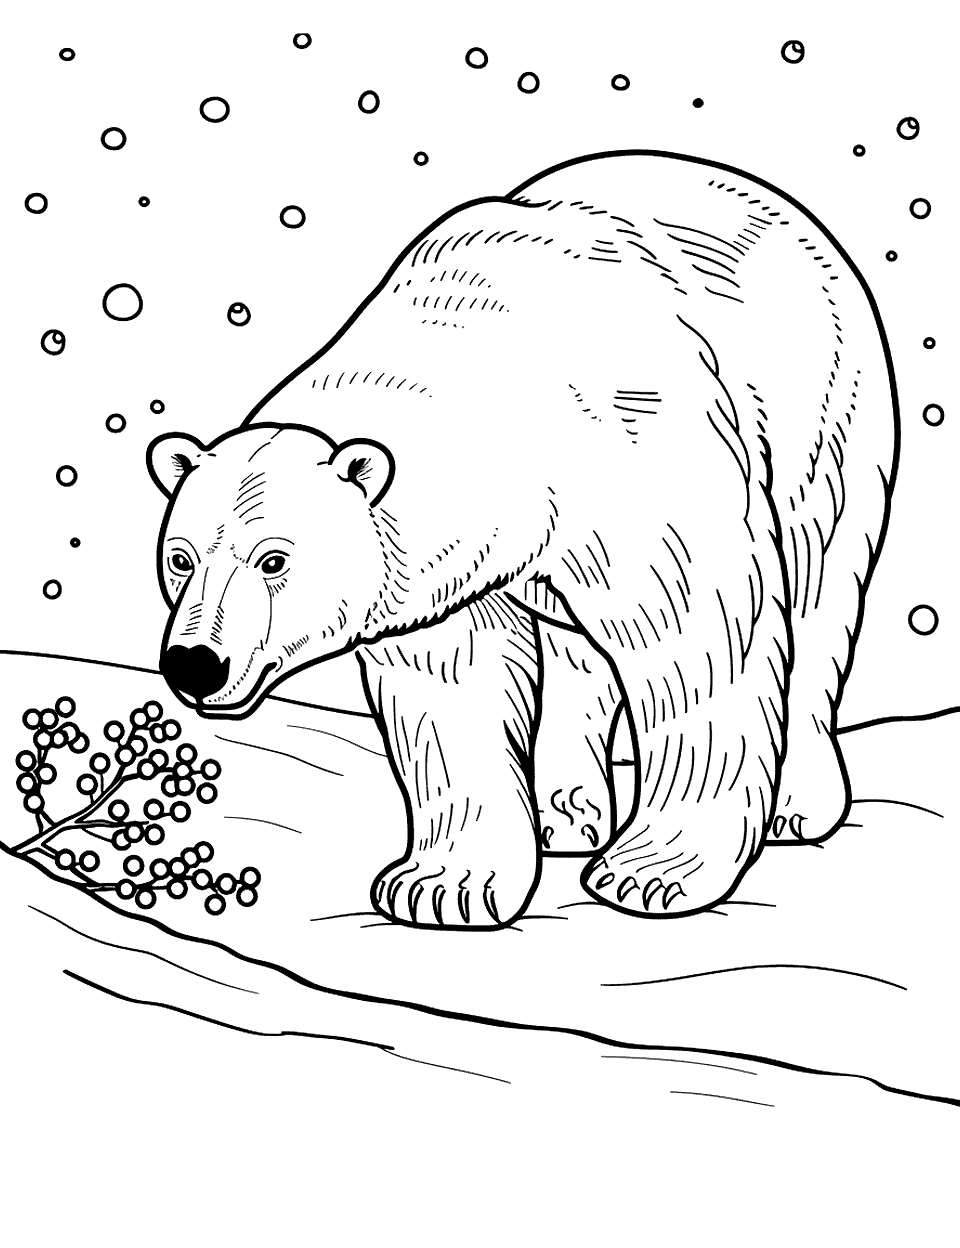 Polar Bear with Winter Berries Coloring Page - A polar bear sniffing at some winter berries.